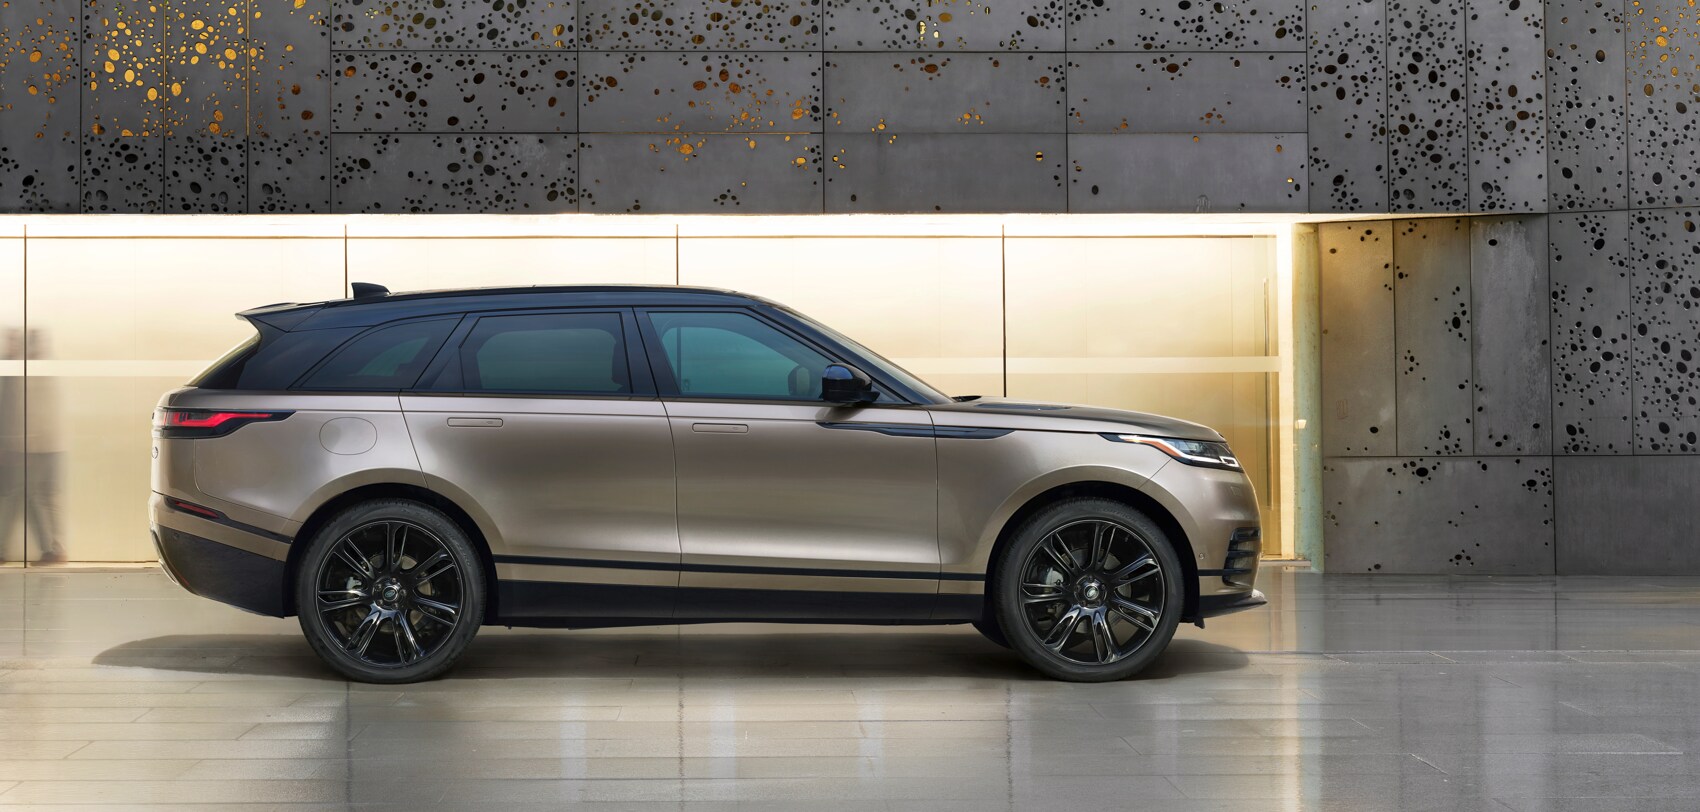 Side Profile of a 2023 Land Rover Range Rover Velar in Lantau Bronze color, available at Land Rover Thousand Oaks in the LA area